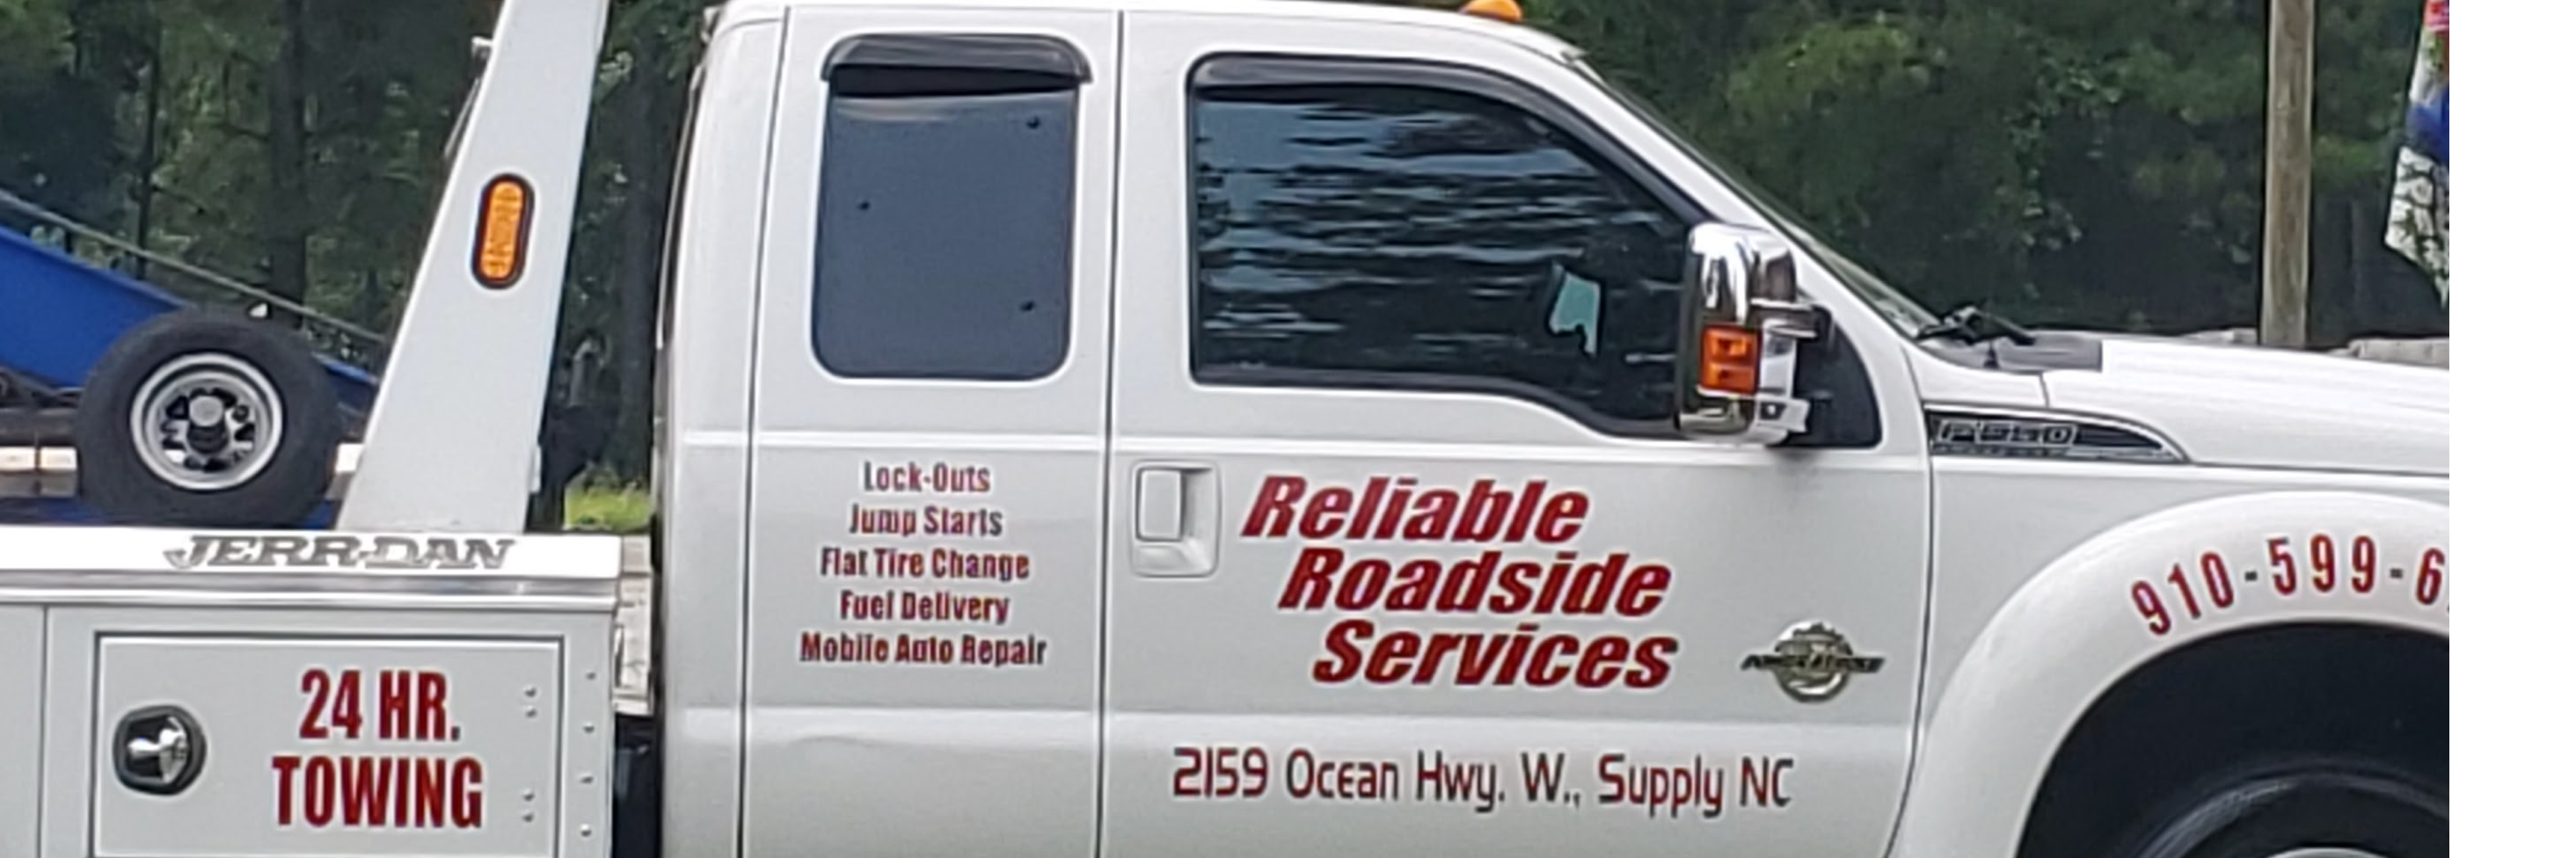 Reliable Roadside Services Inc Towing.com Profile Banner